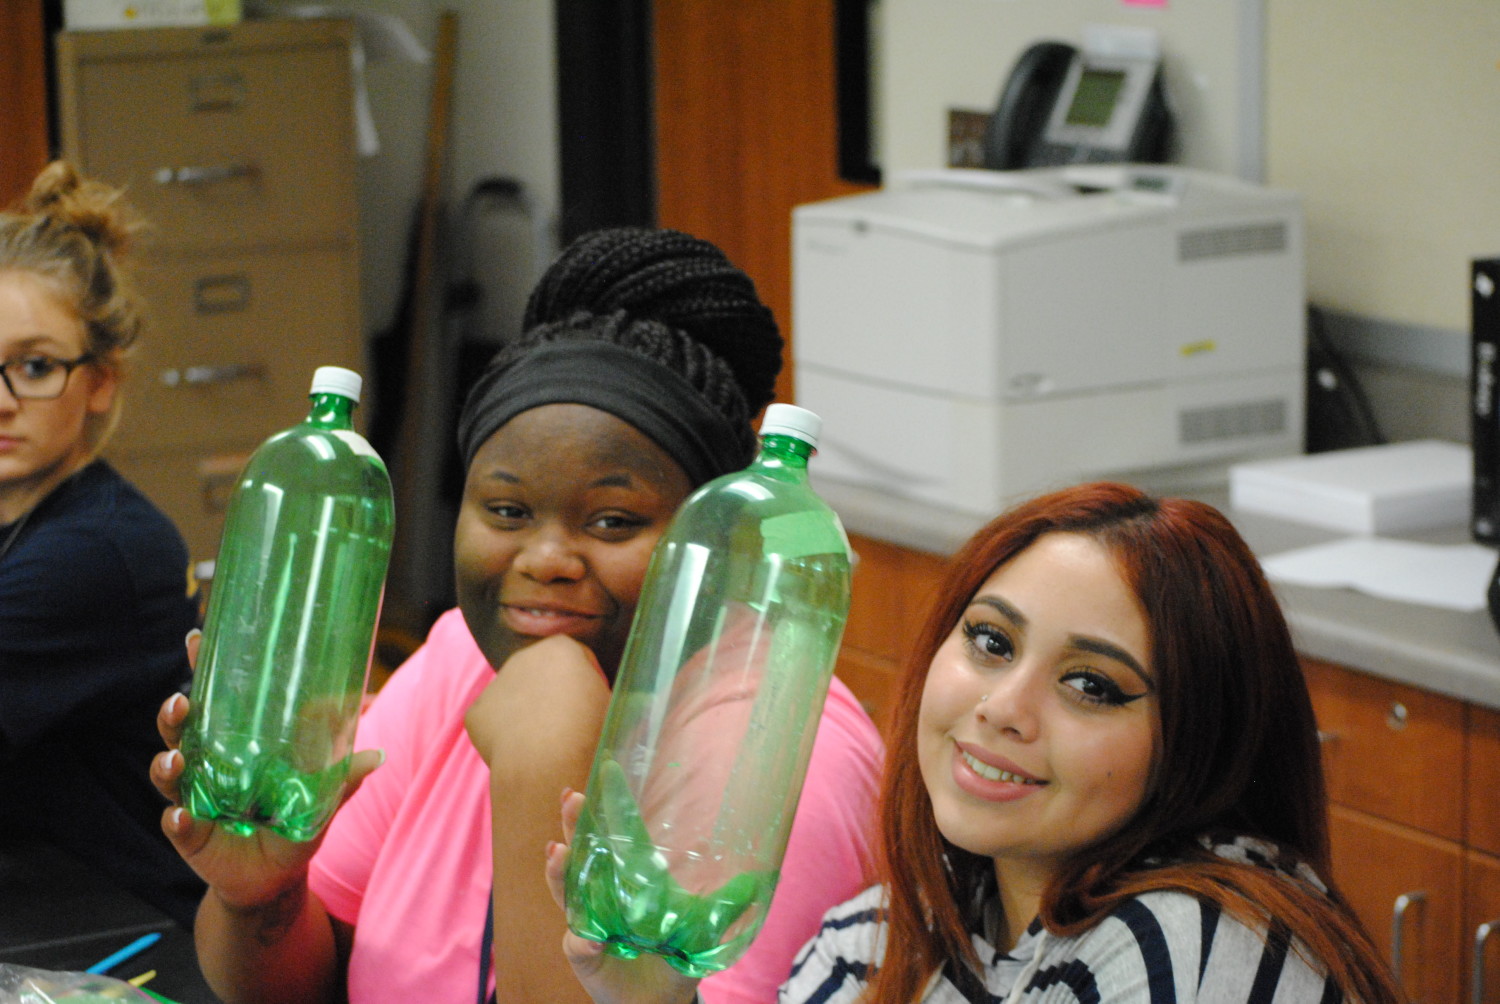 Hauke students hold up the bottles that they will make into rockets in physics class.